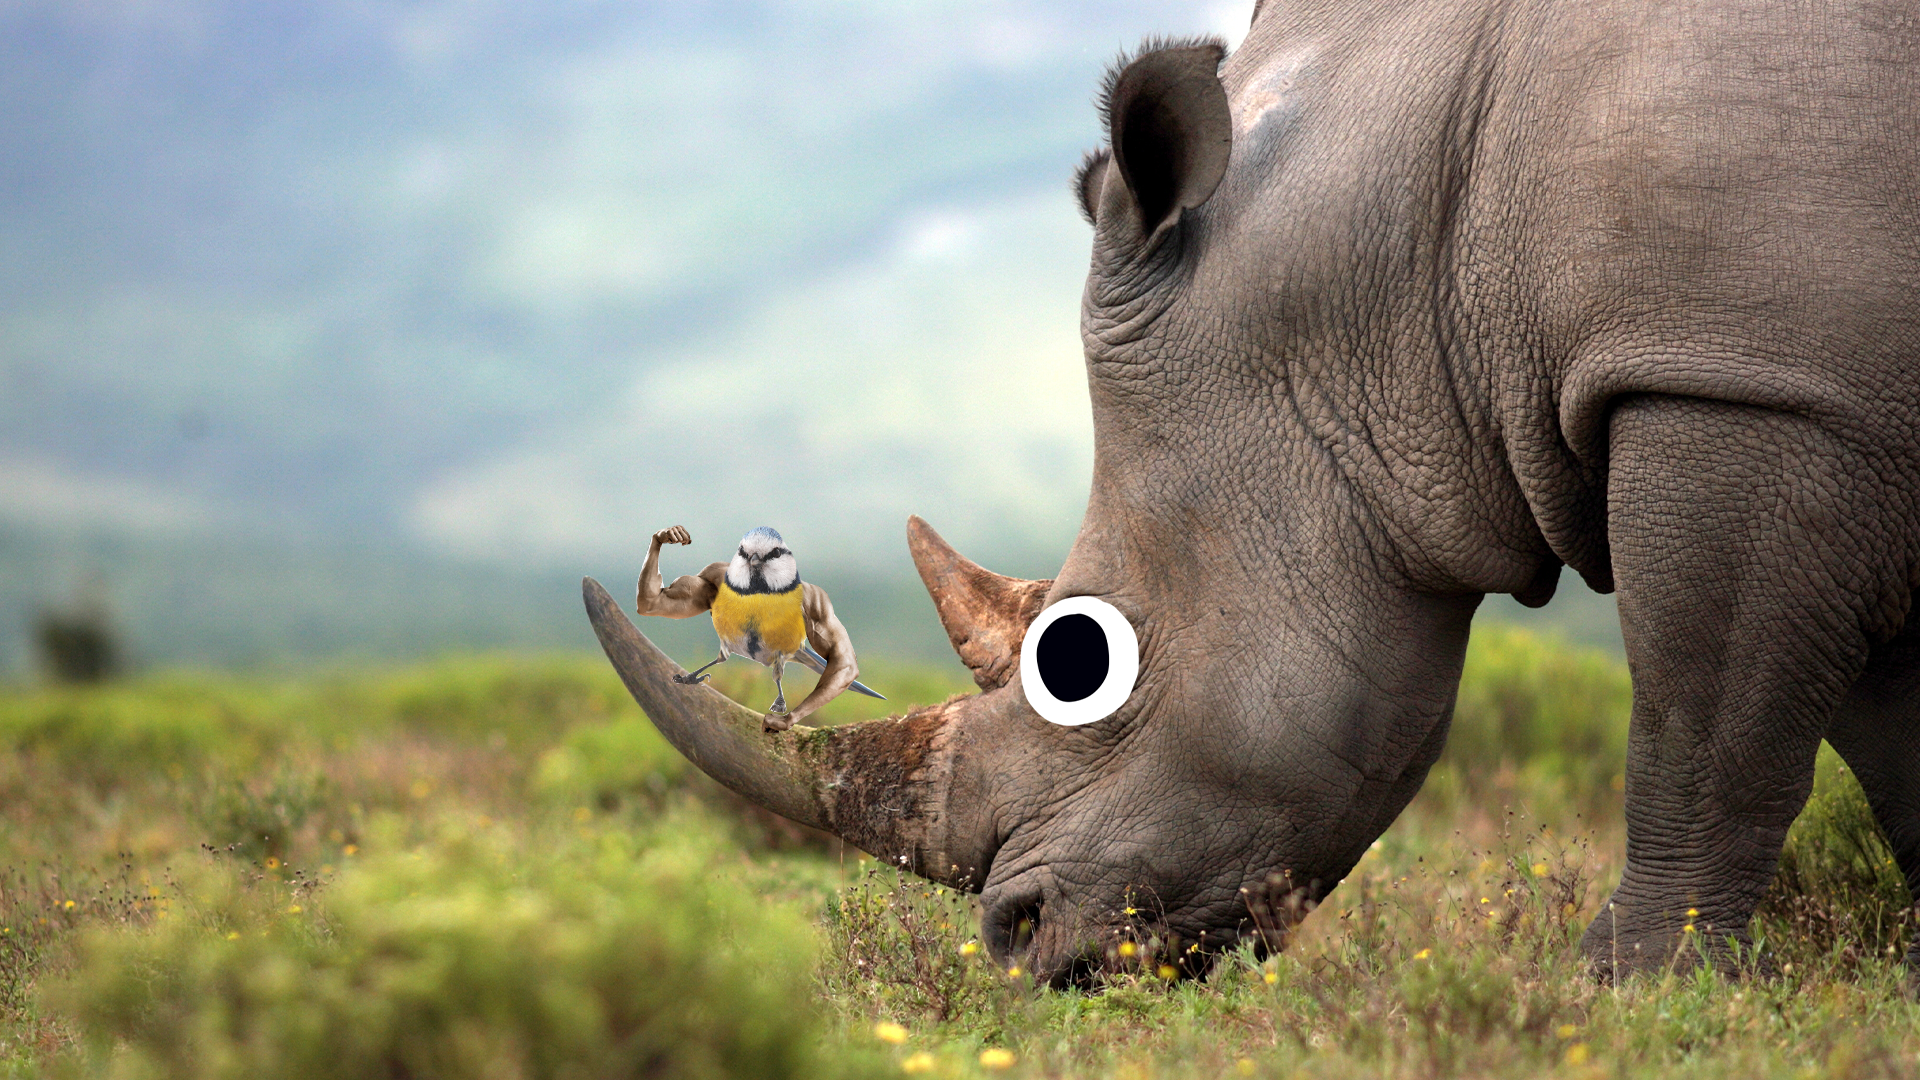 A rhino with a Beano bluetit on its horn